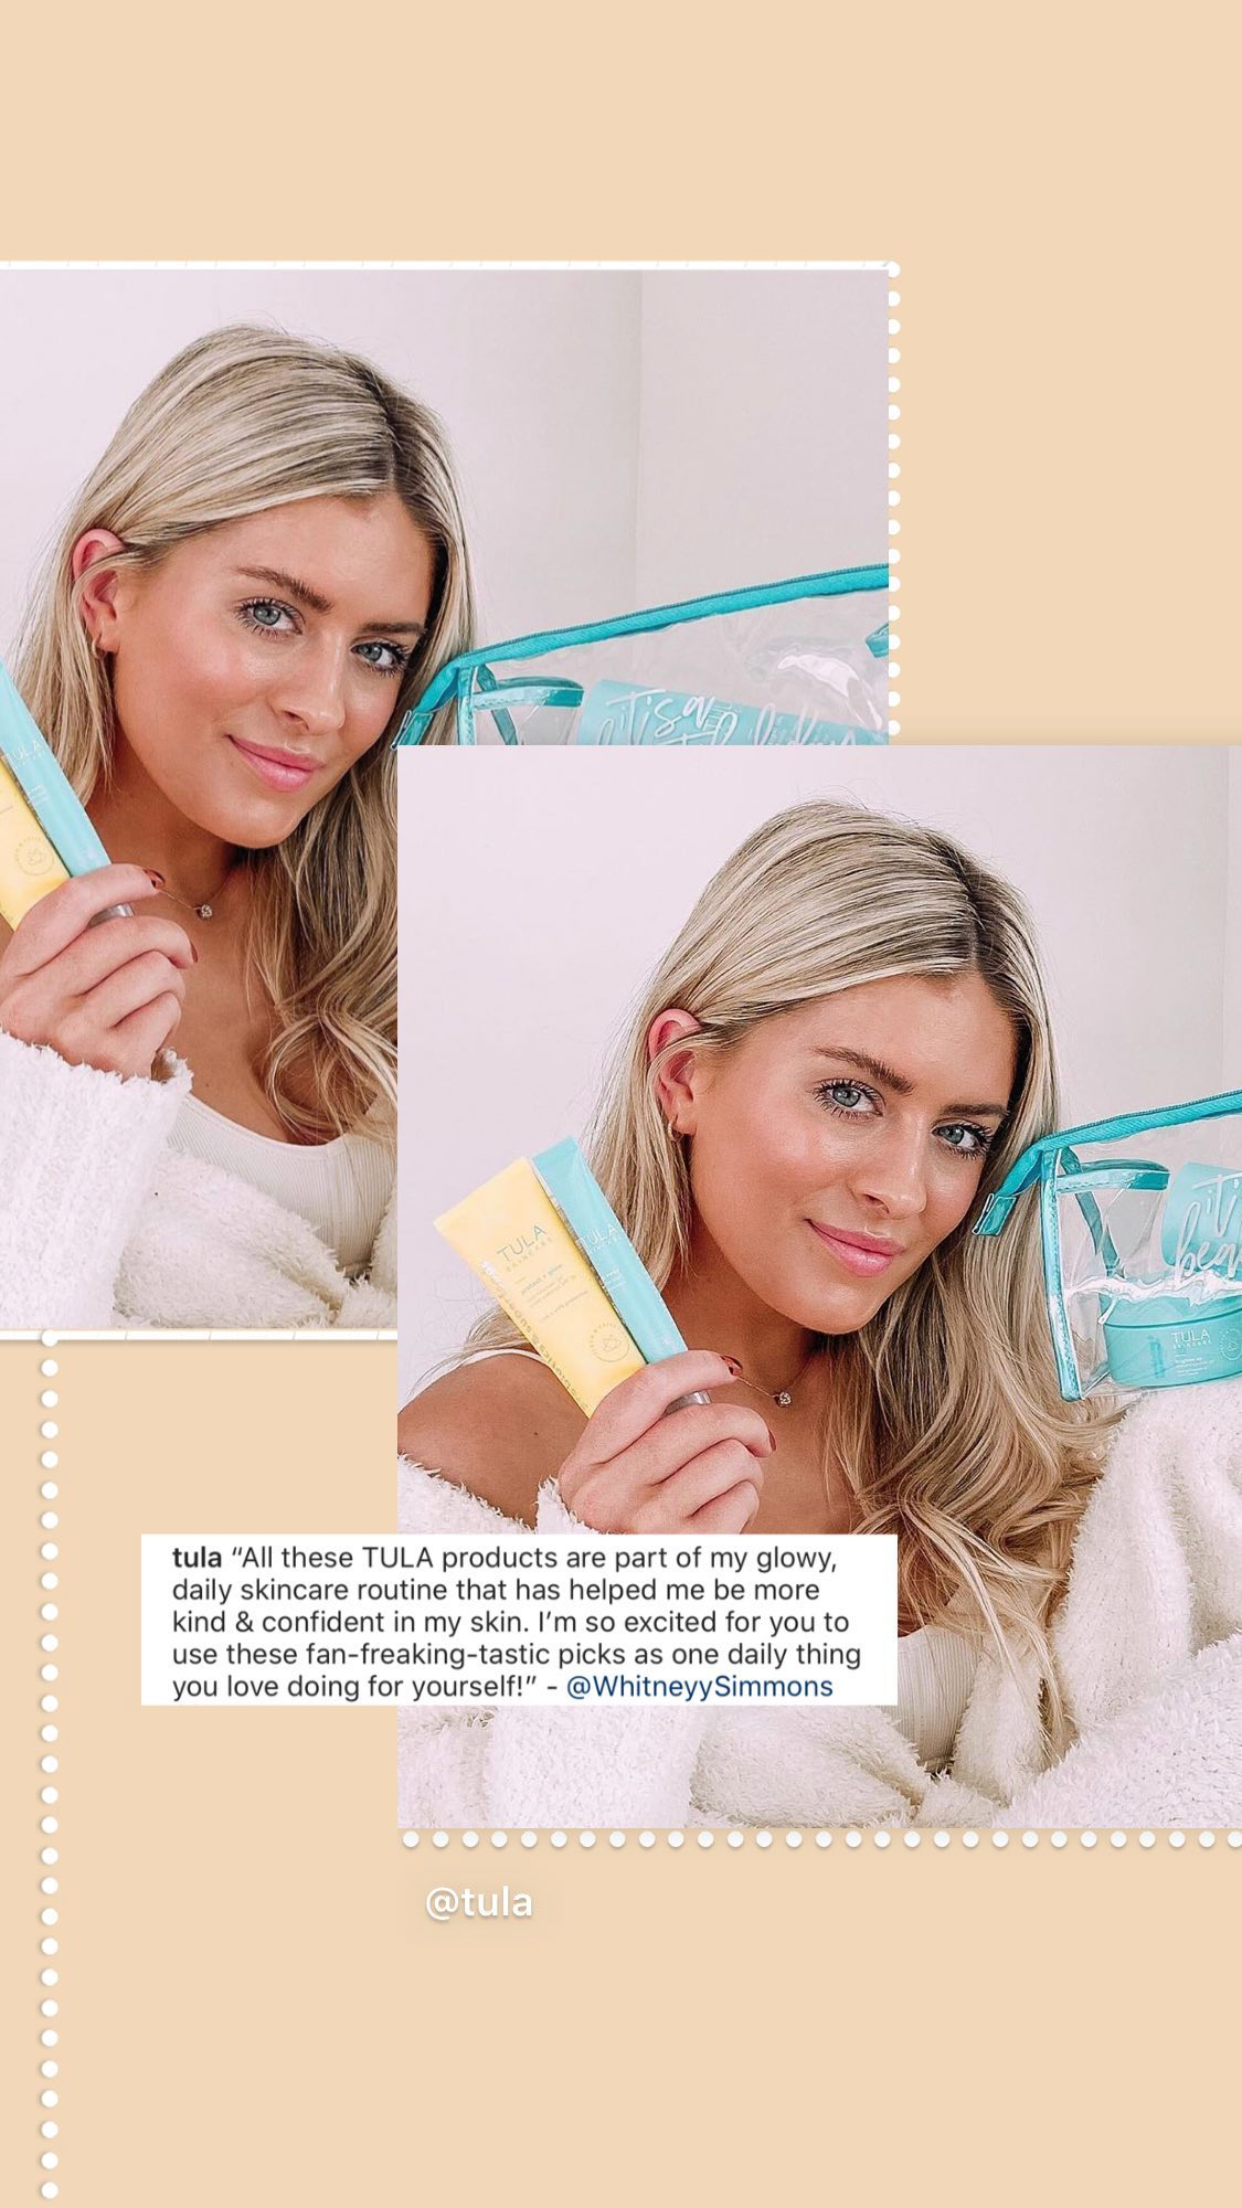 Whitney Simmons and Tula Skincare, by Nichole Celotto